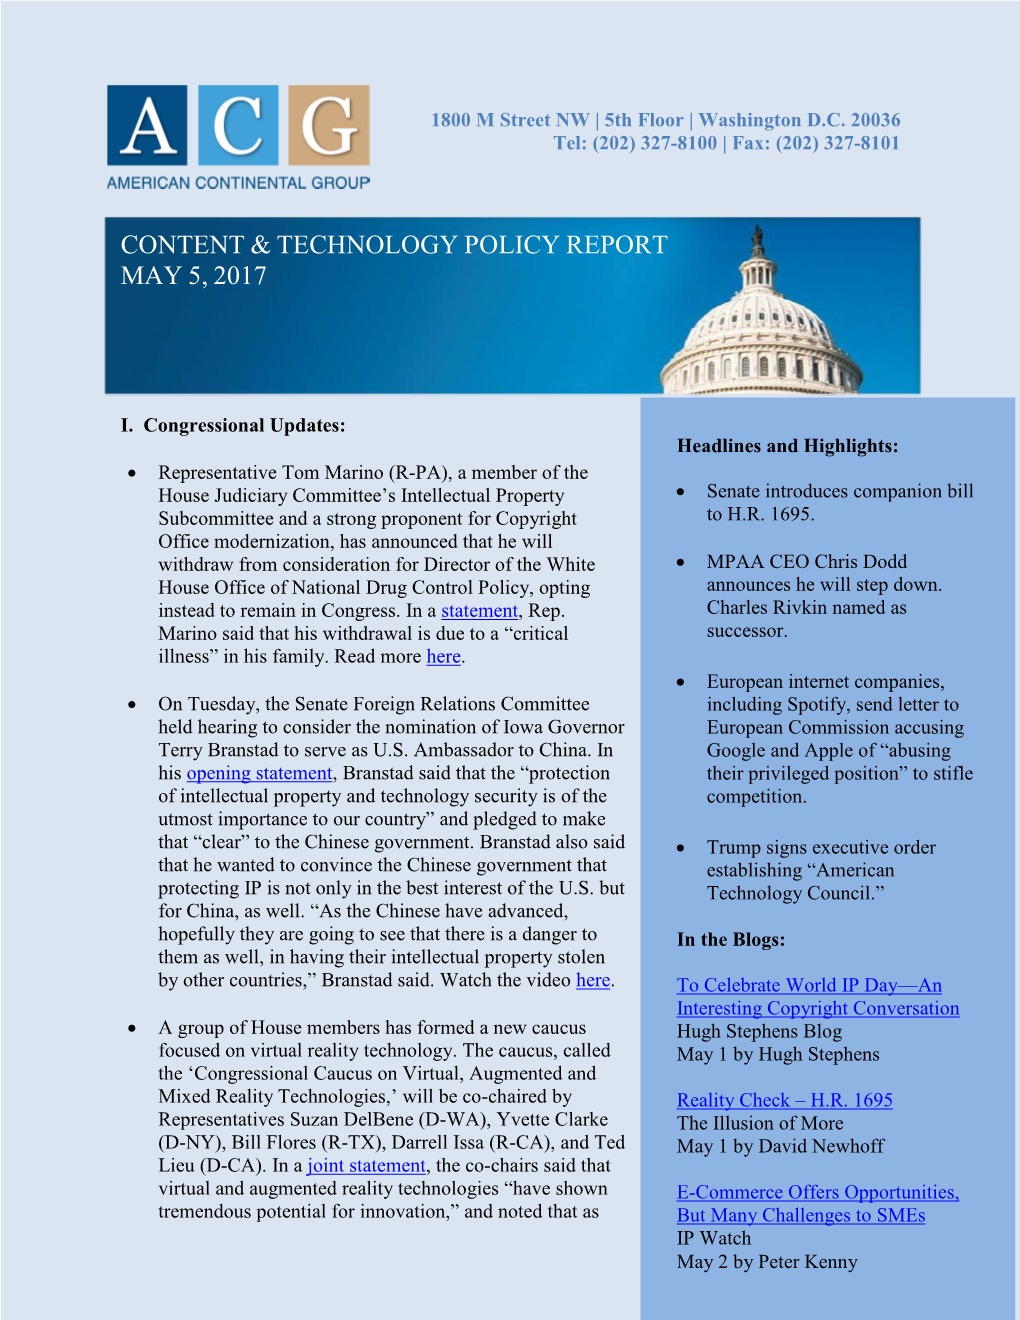 Content & Technology Policy Report May 5, 2017